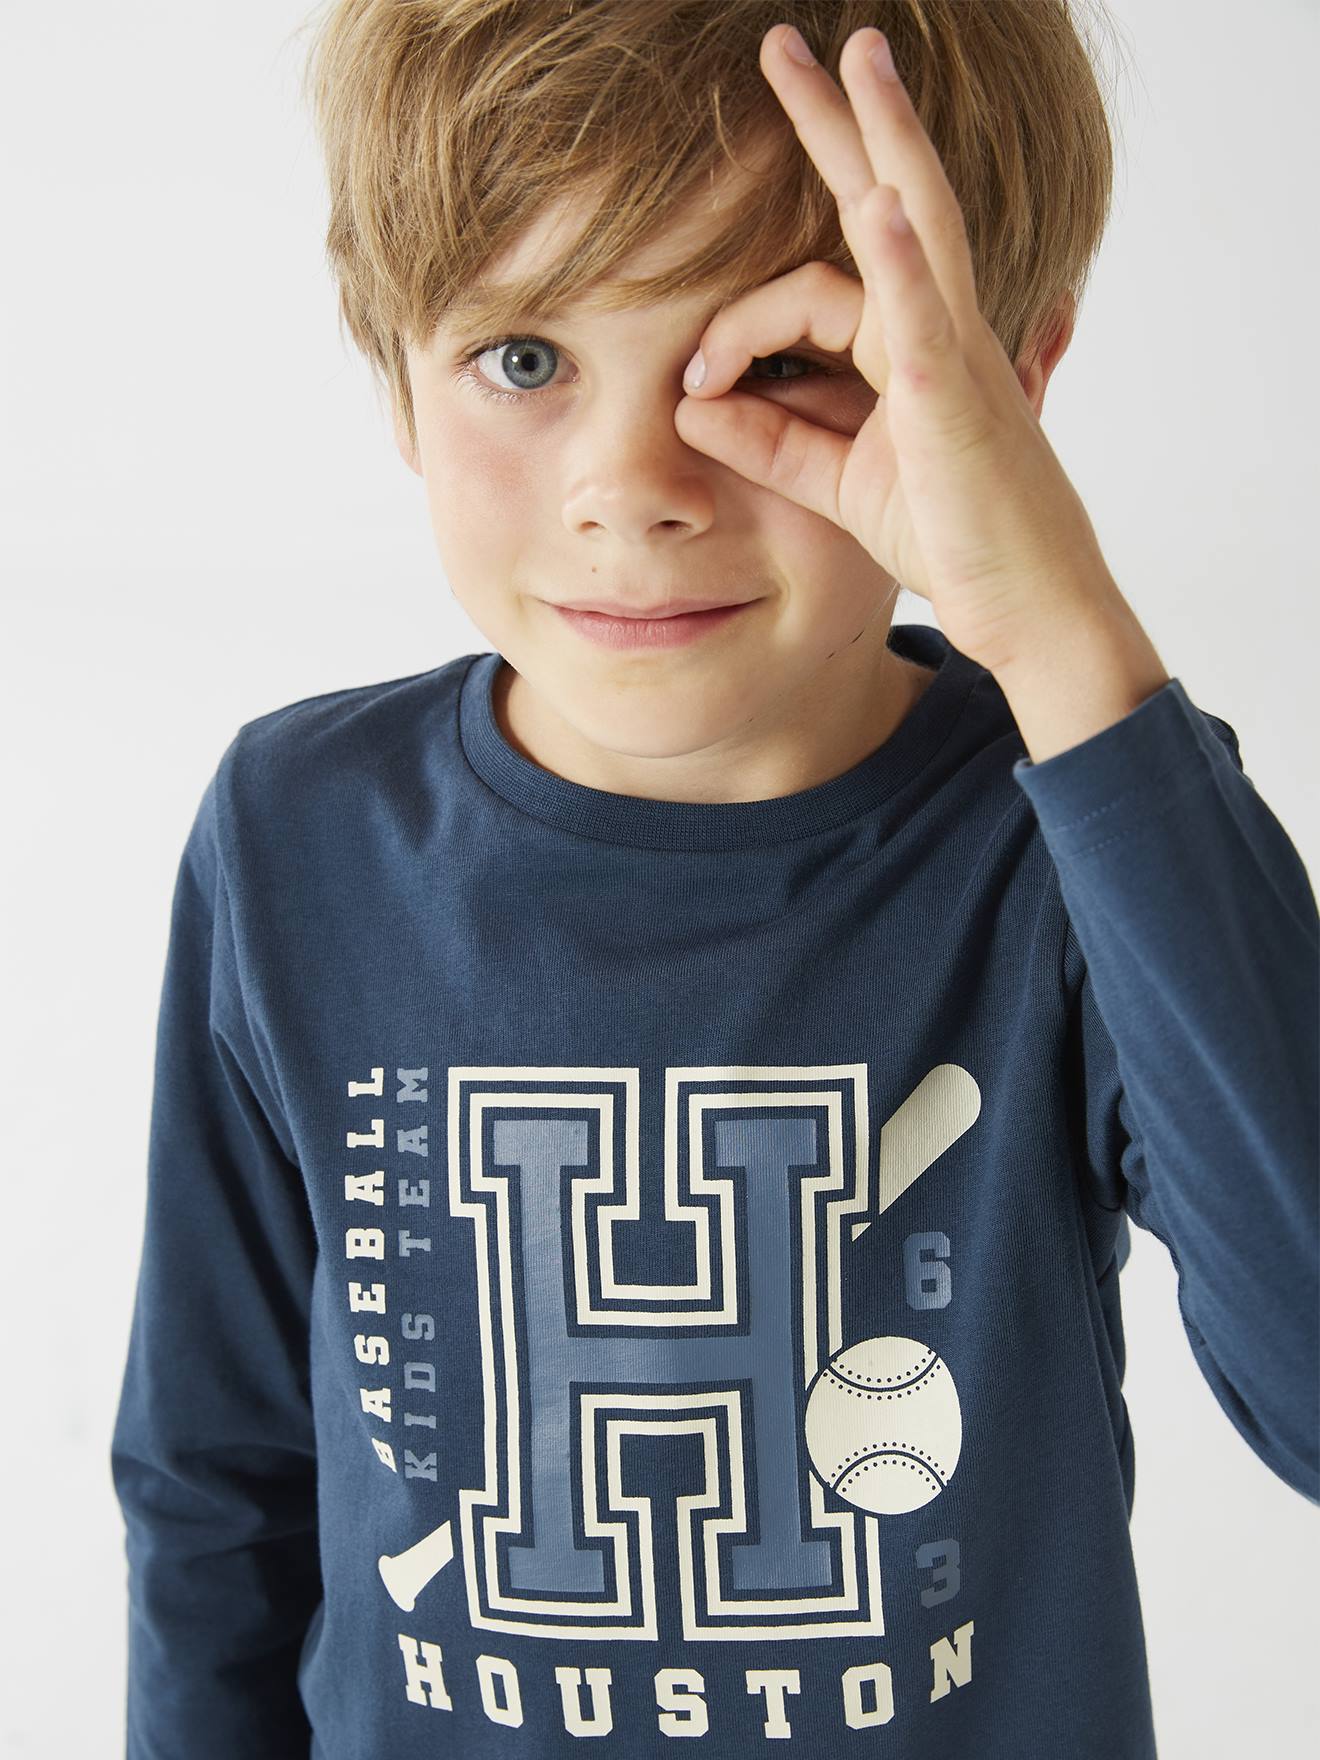 Basics Long Sleeve Top with Fun or Graphic Motif for Boys navy blue